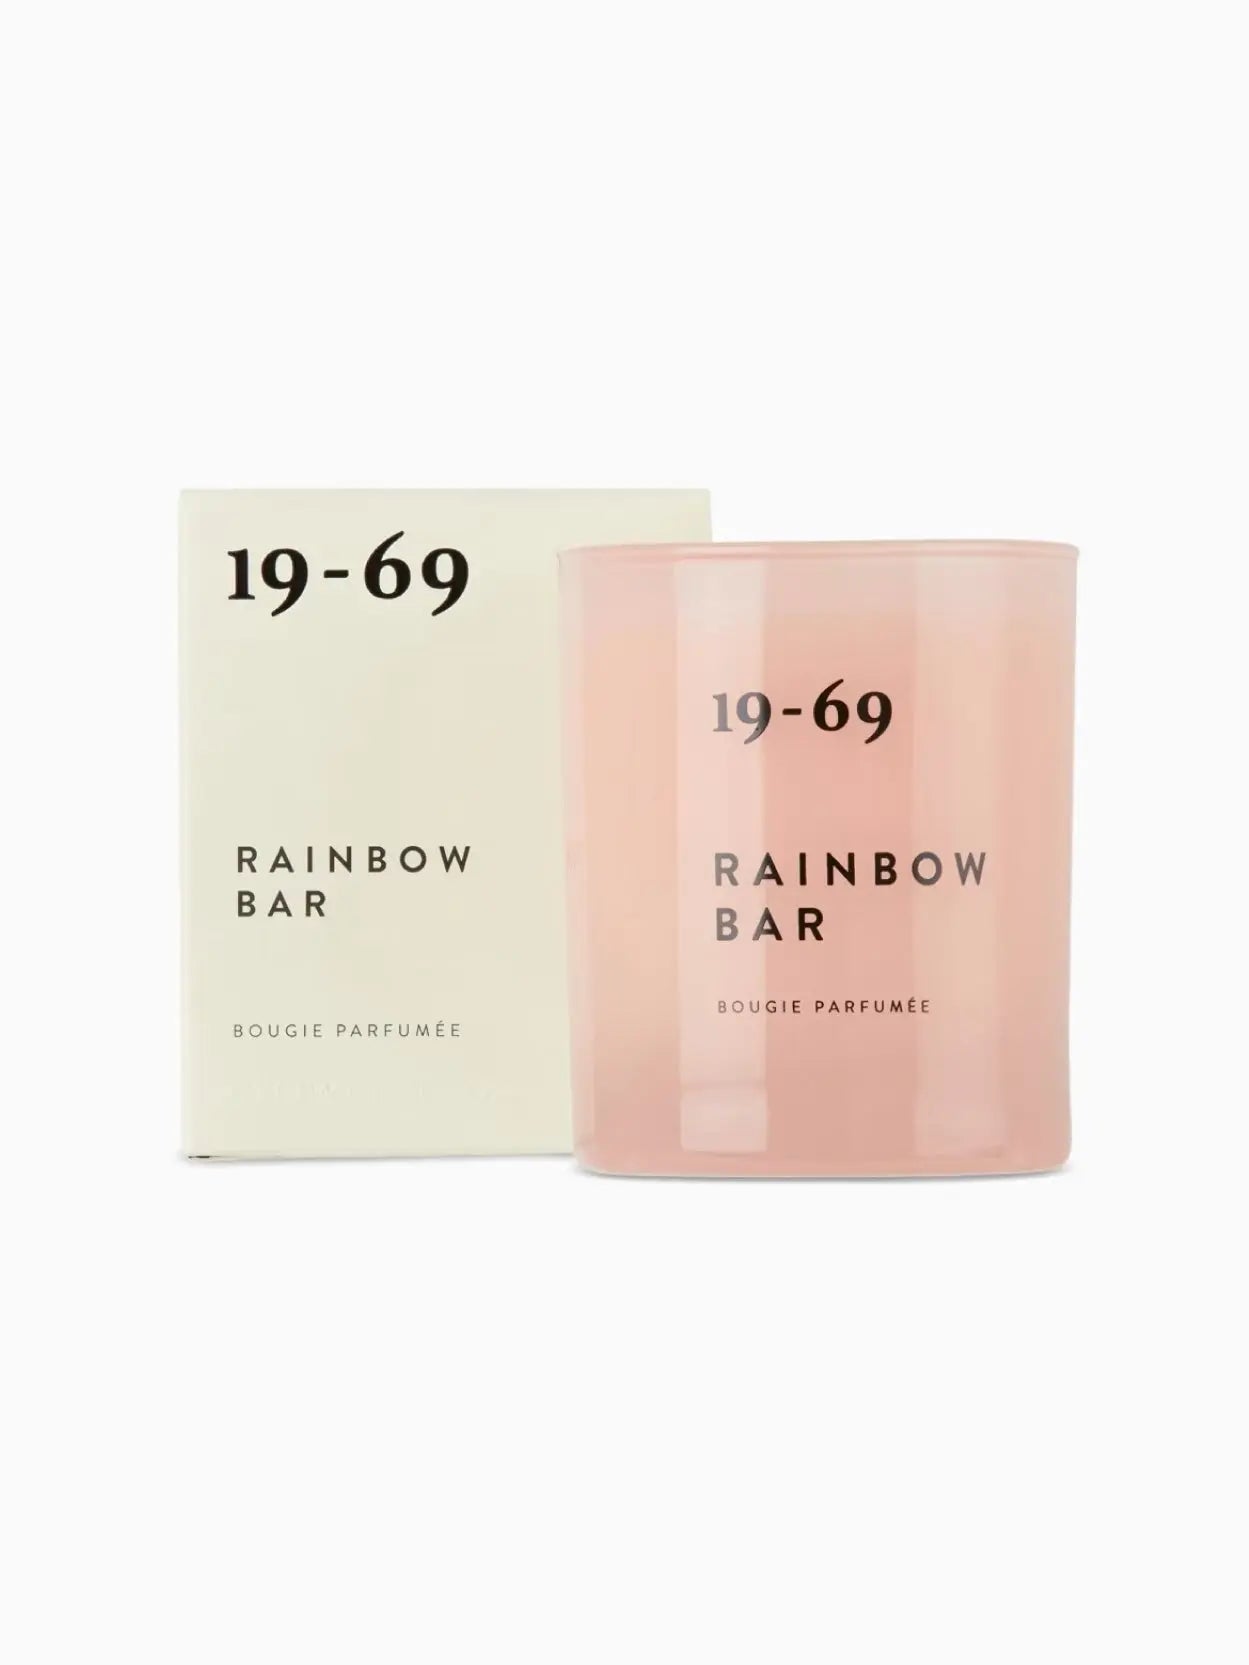 A pink candle labeled "Rainbow Bar Candle 200ml" by 19-69 in black text is displayed against a white background. The candle has a minimalistic design with its name and type "BOUGIE PARFUMÉE" printed below the main label, available exclusively at Bassalstore in Barcelona.